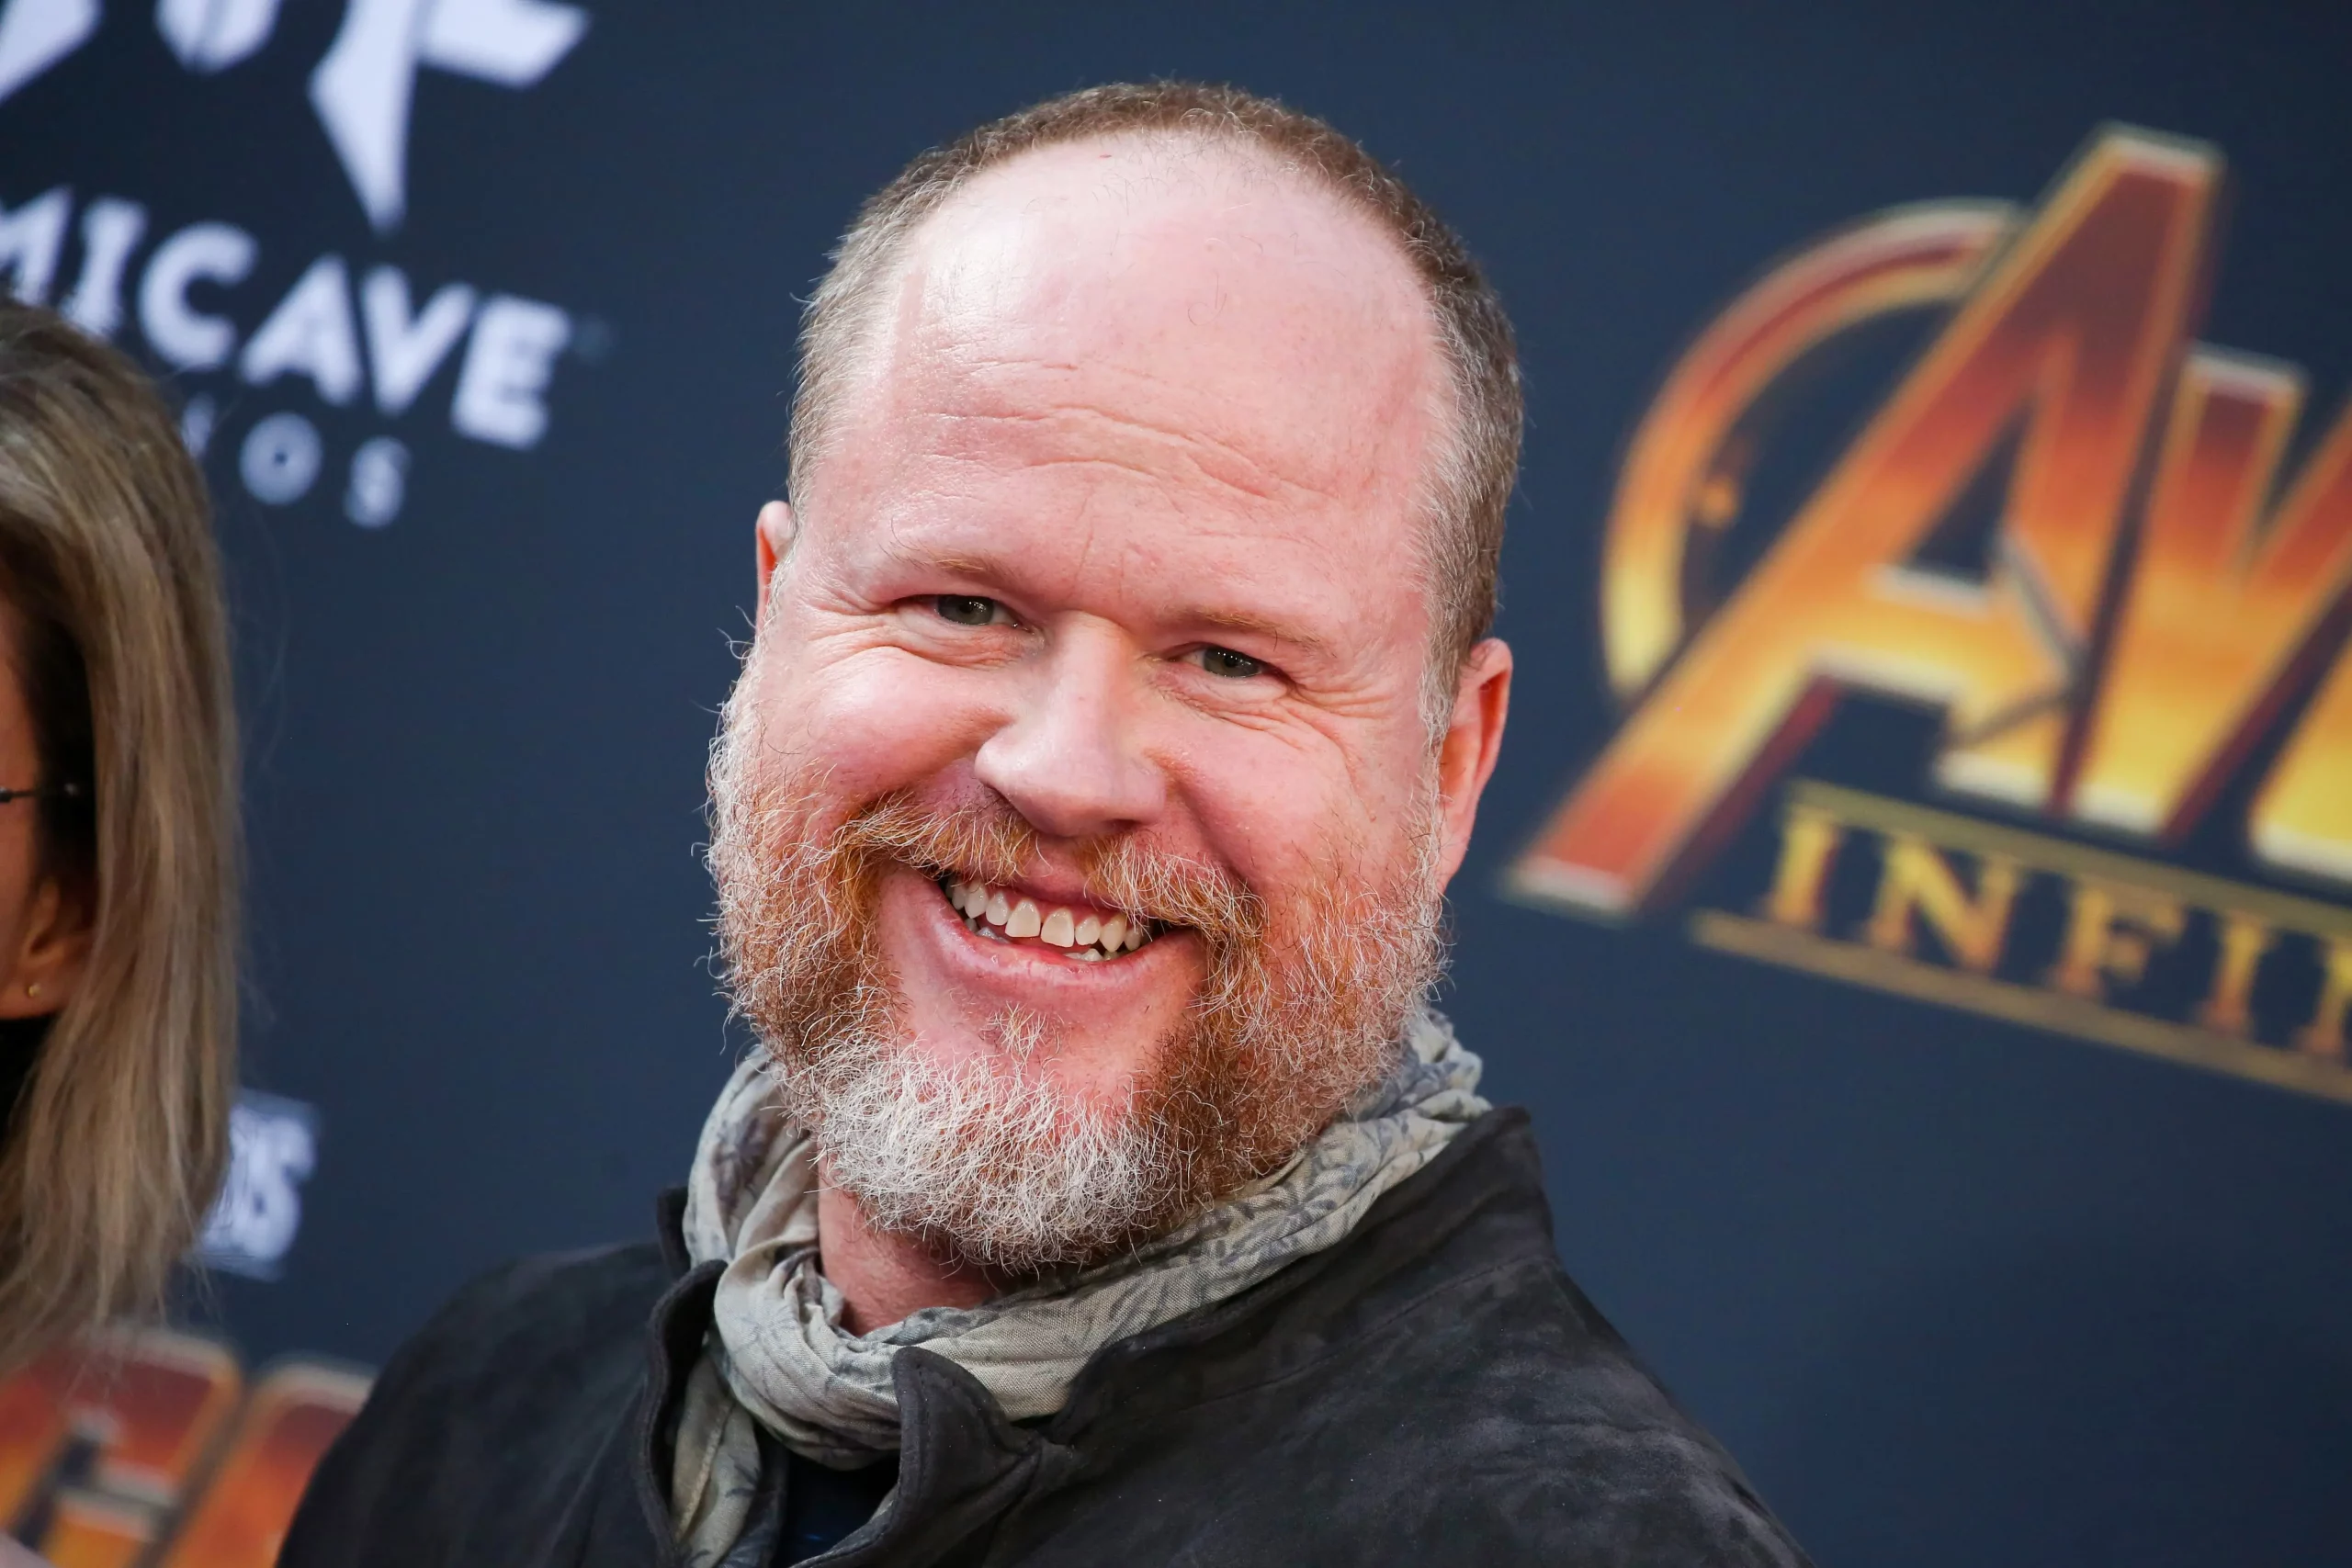 American filmmaker, composer and comic book writer Joss Whedon, who worked with Nathan Fillion.